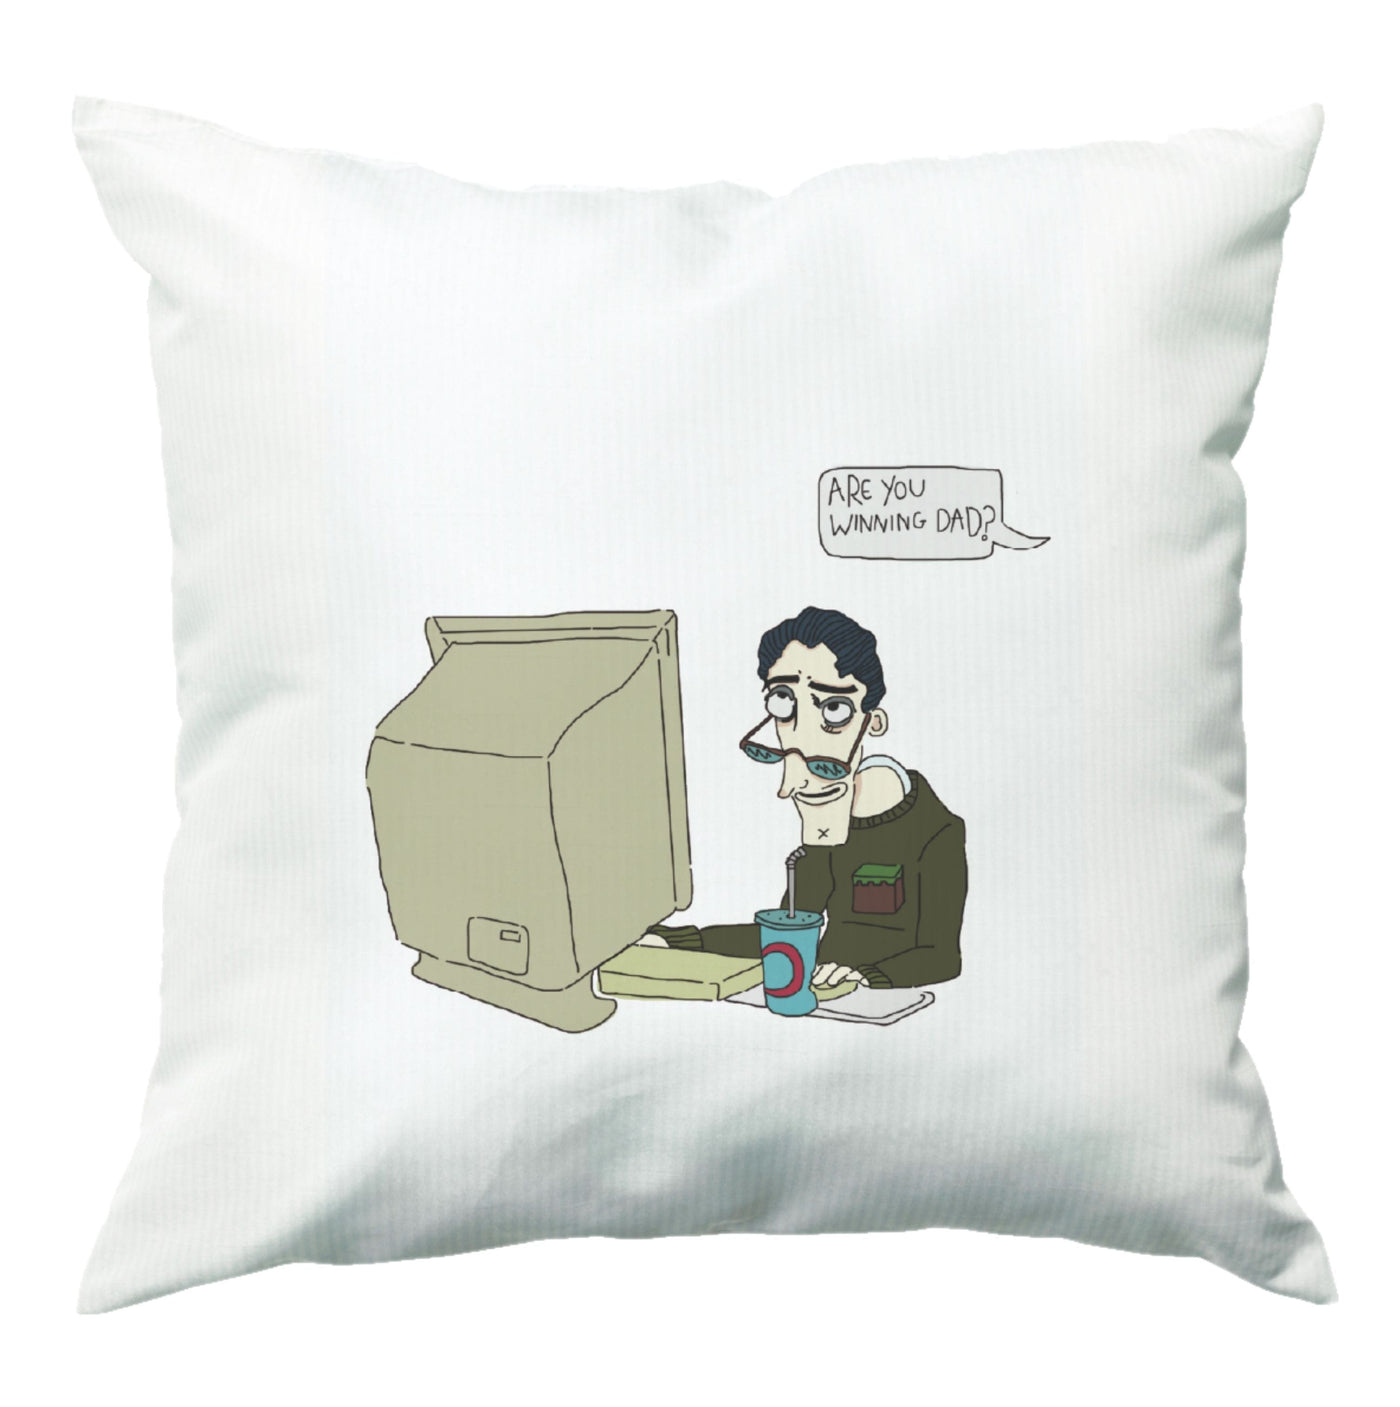 Are You Winning Dad - Coraline Cushion